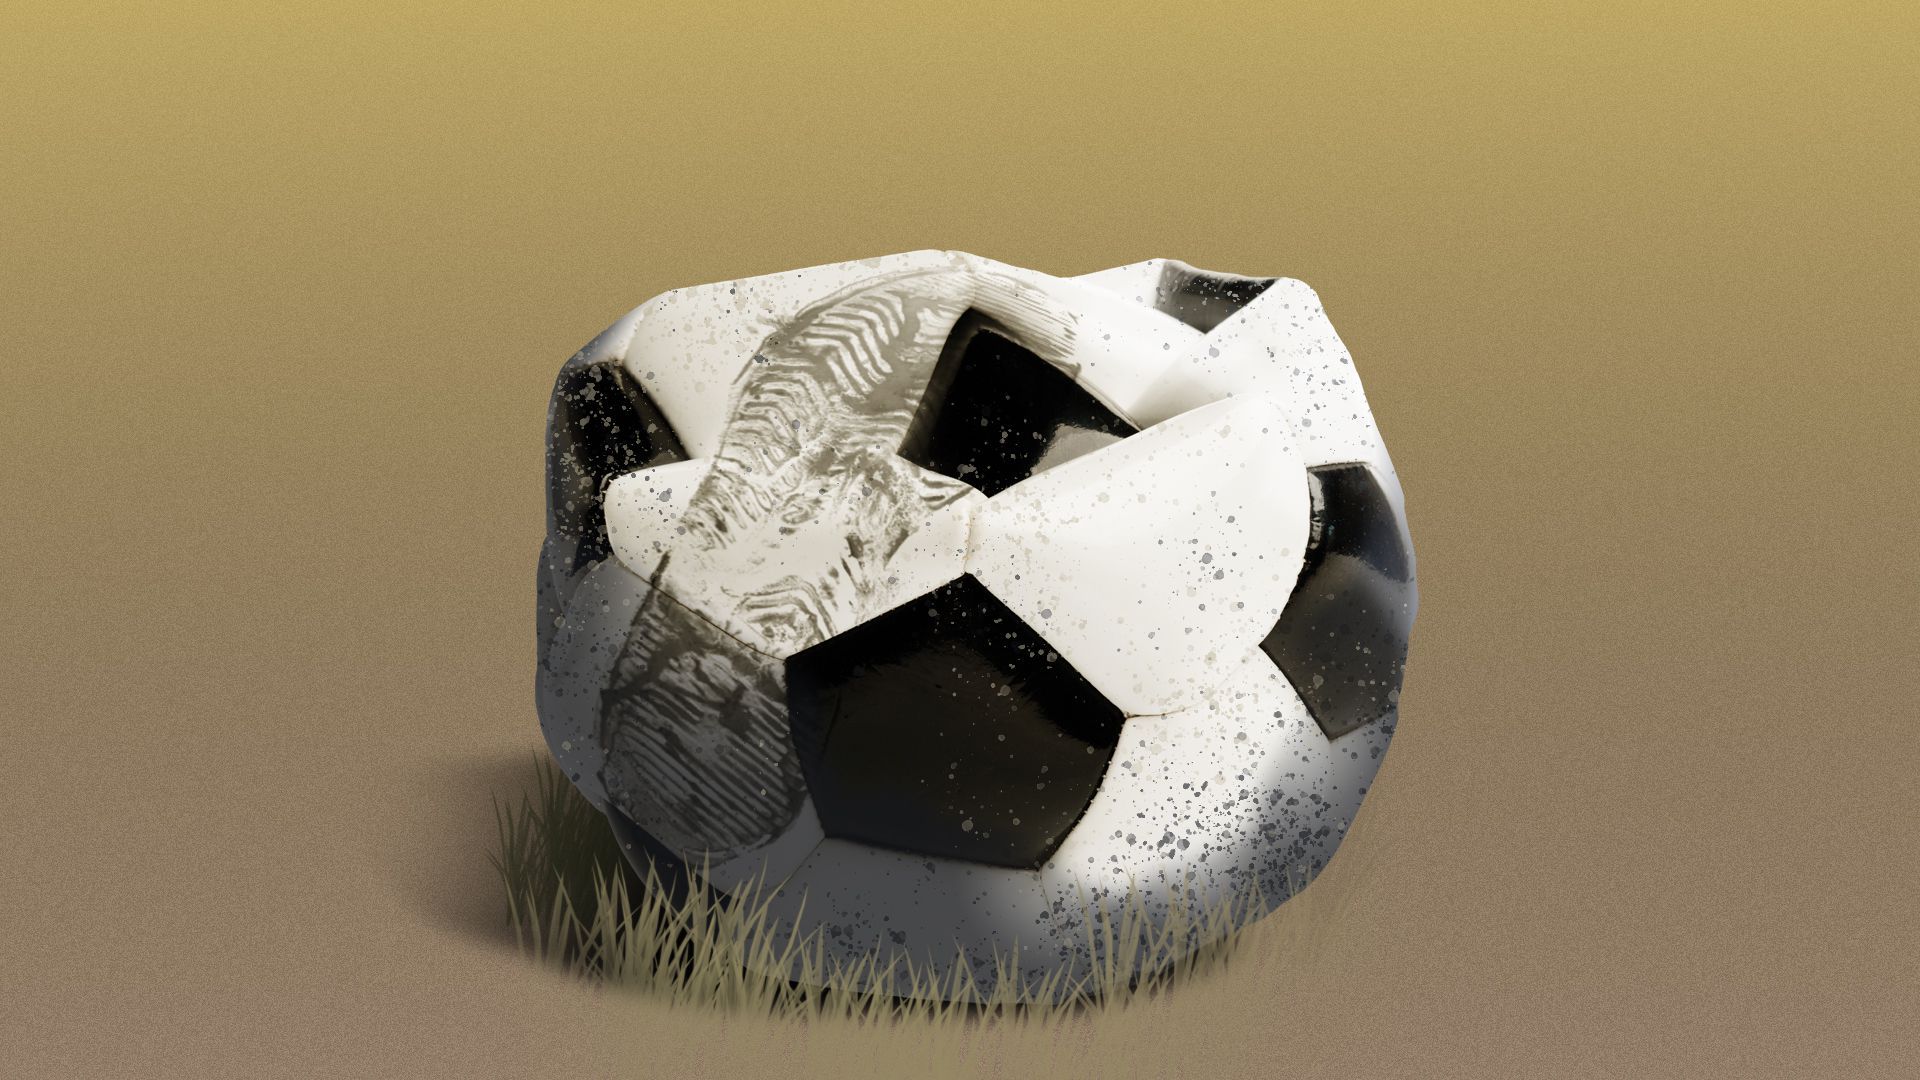 Illustration of a dirty and deflated soccer ball